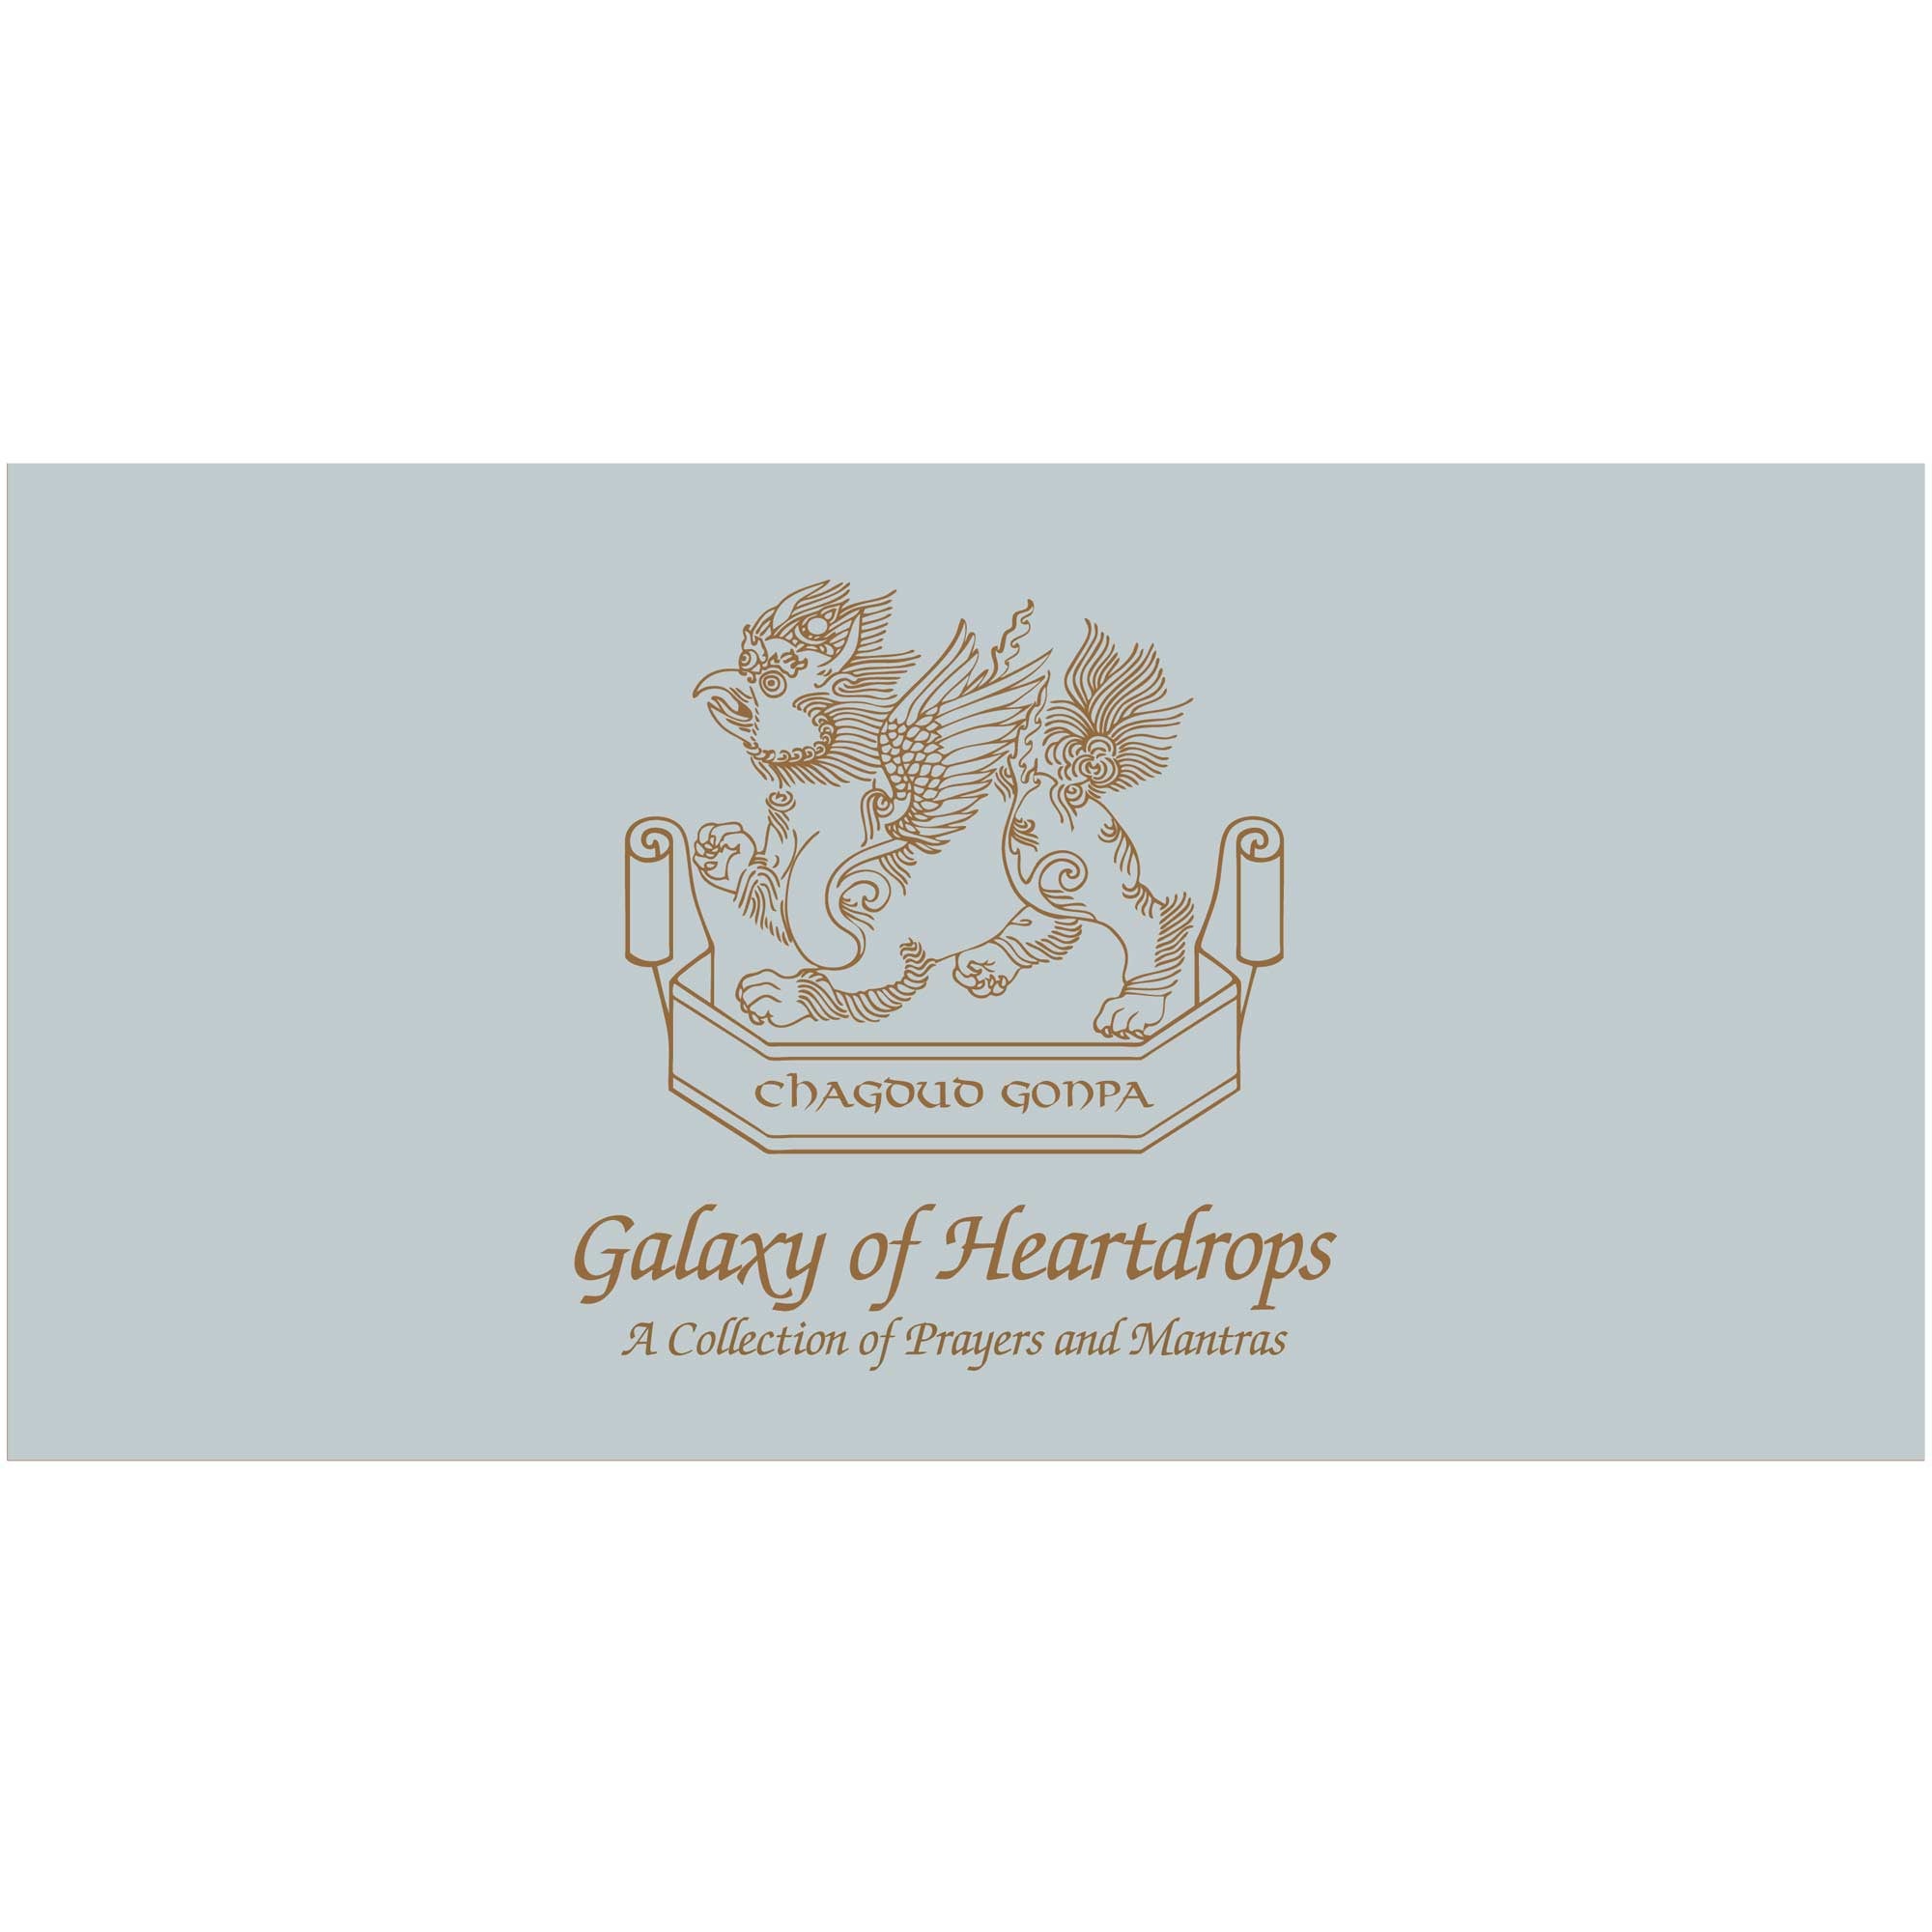 Galaxy of Heartdrops Text